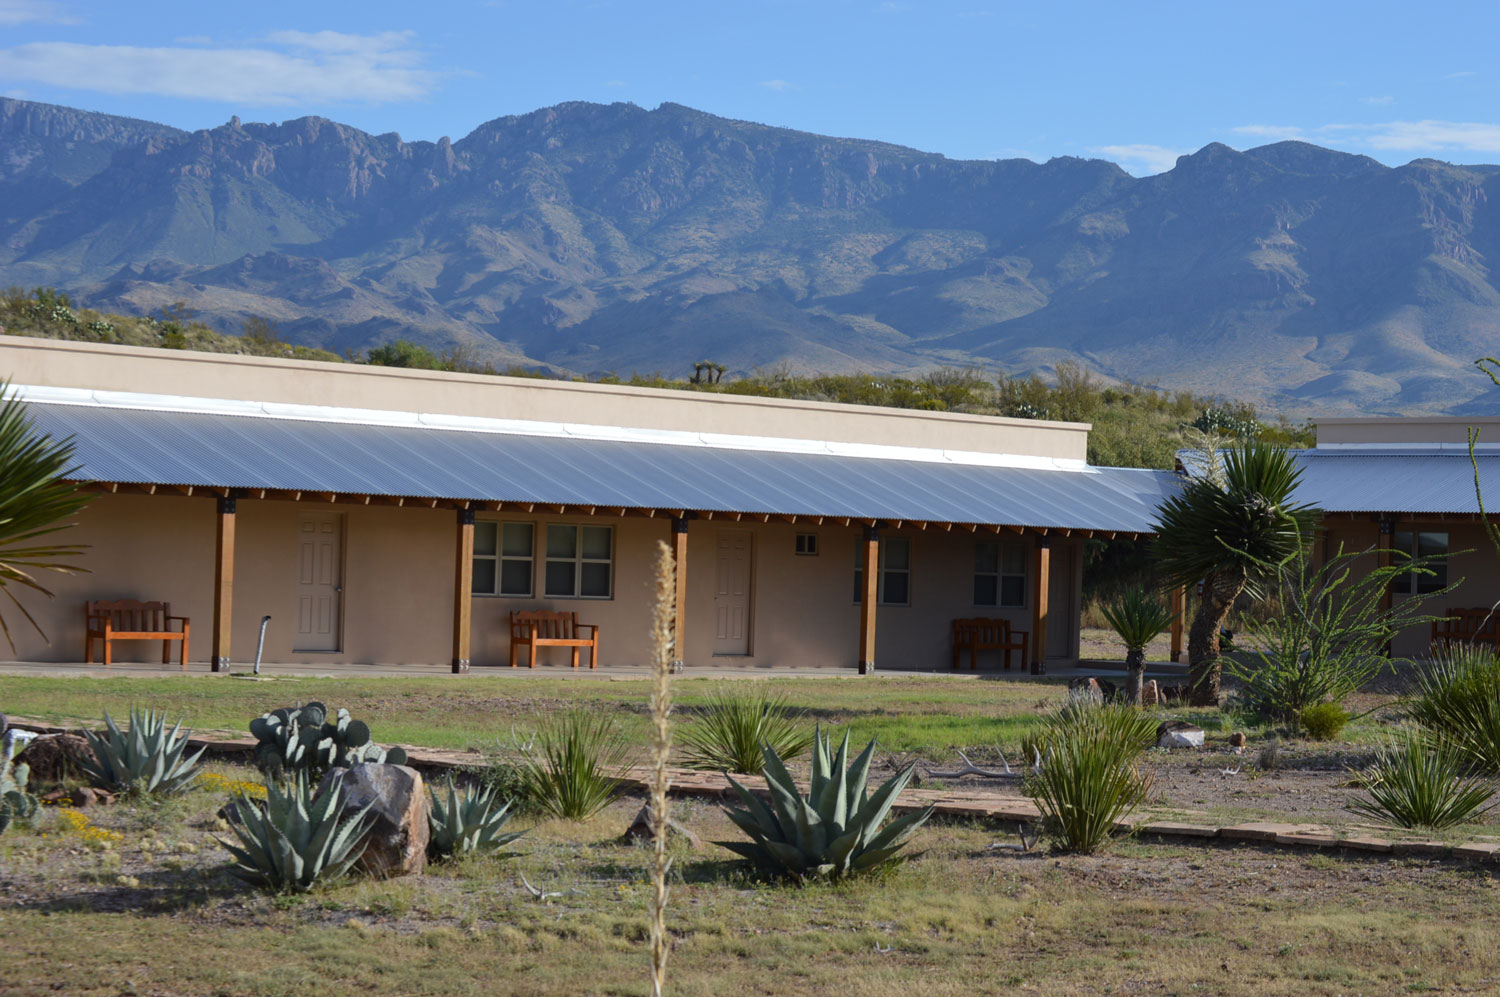 Rustic accommodations at Pilares with mountains in the background